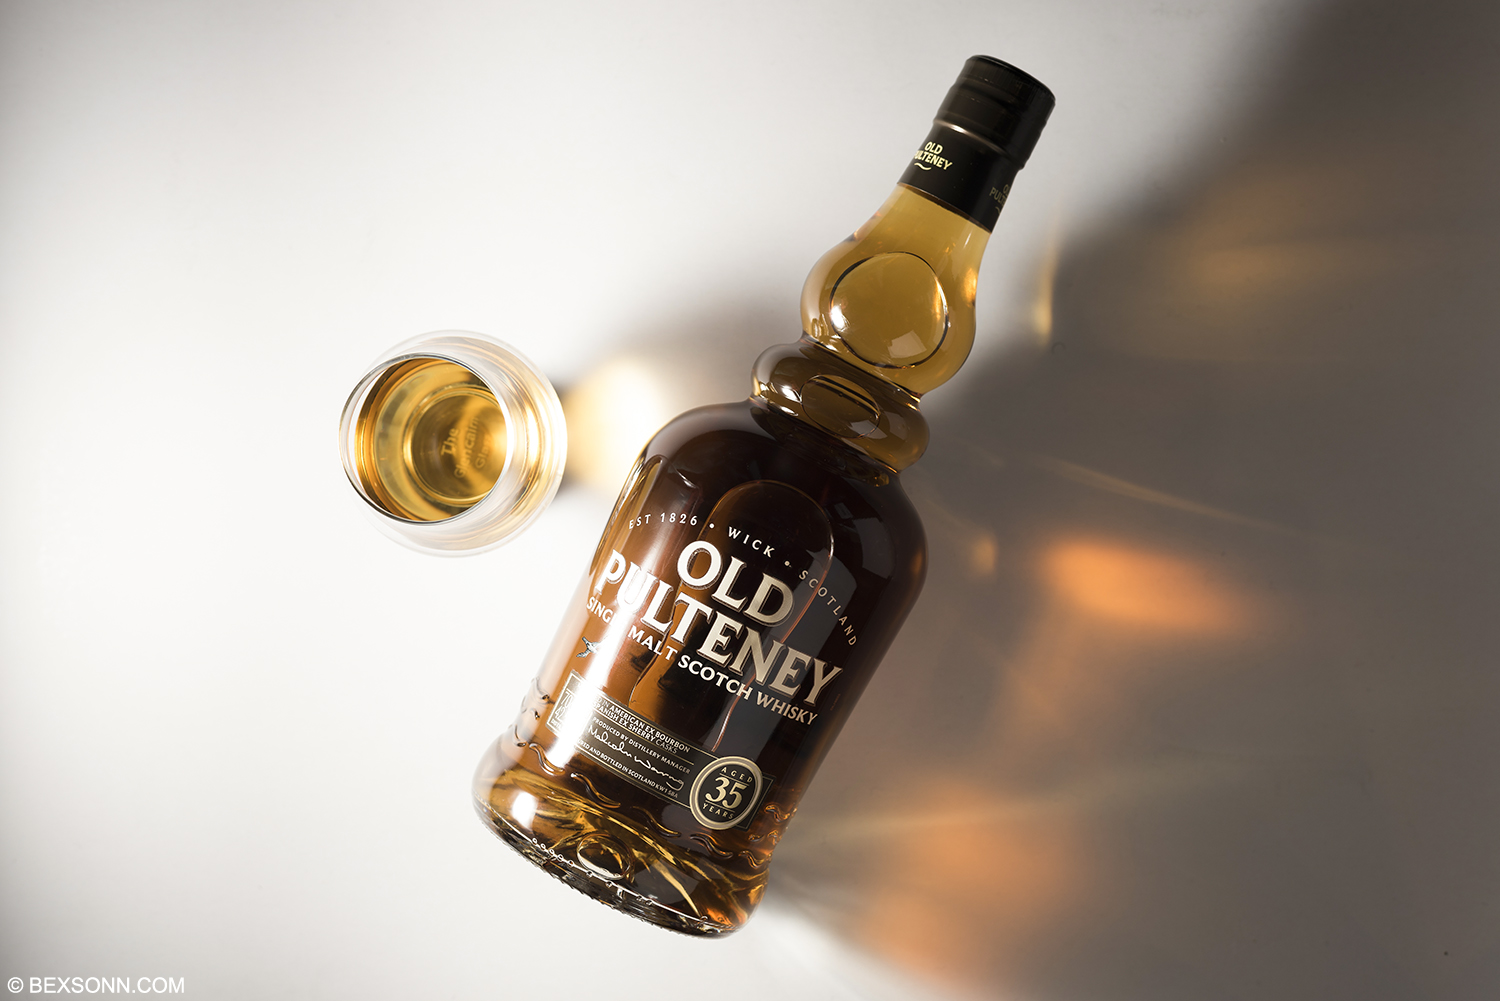 old pulteney 35